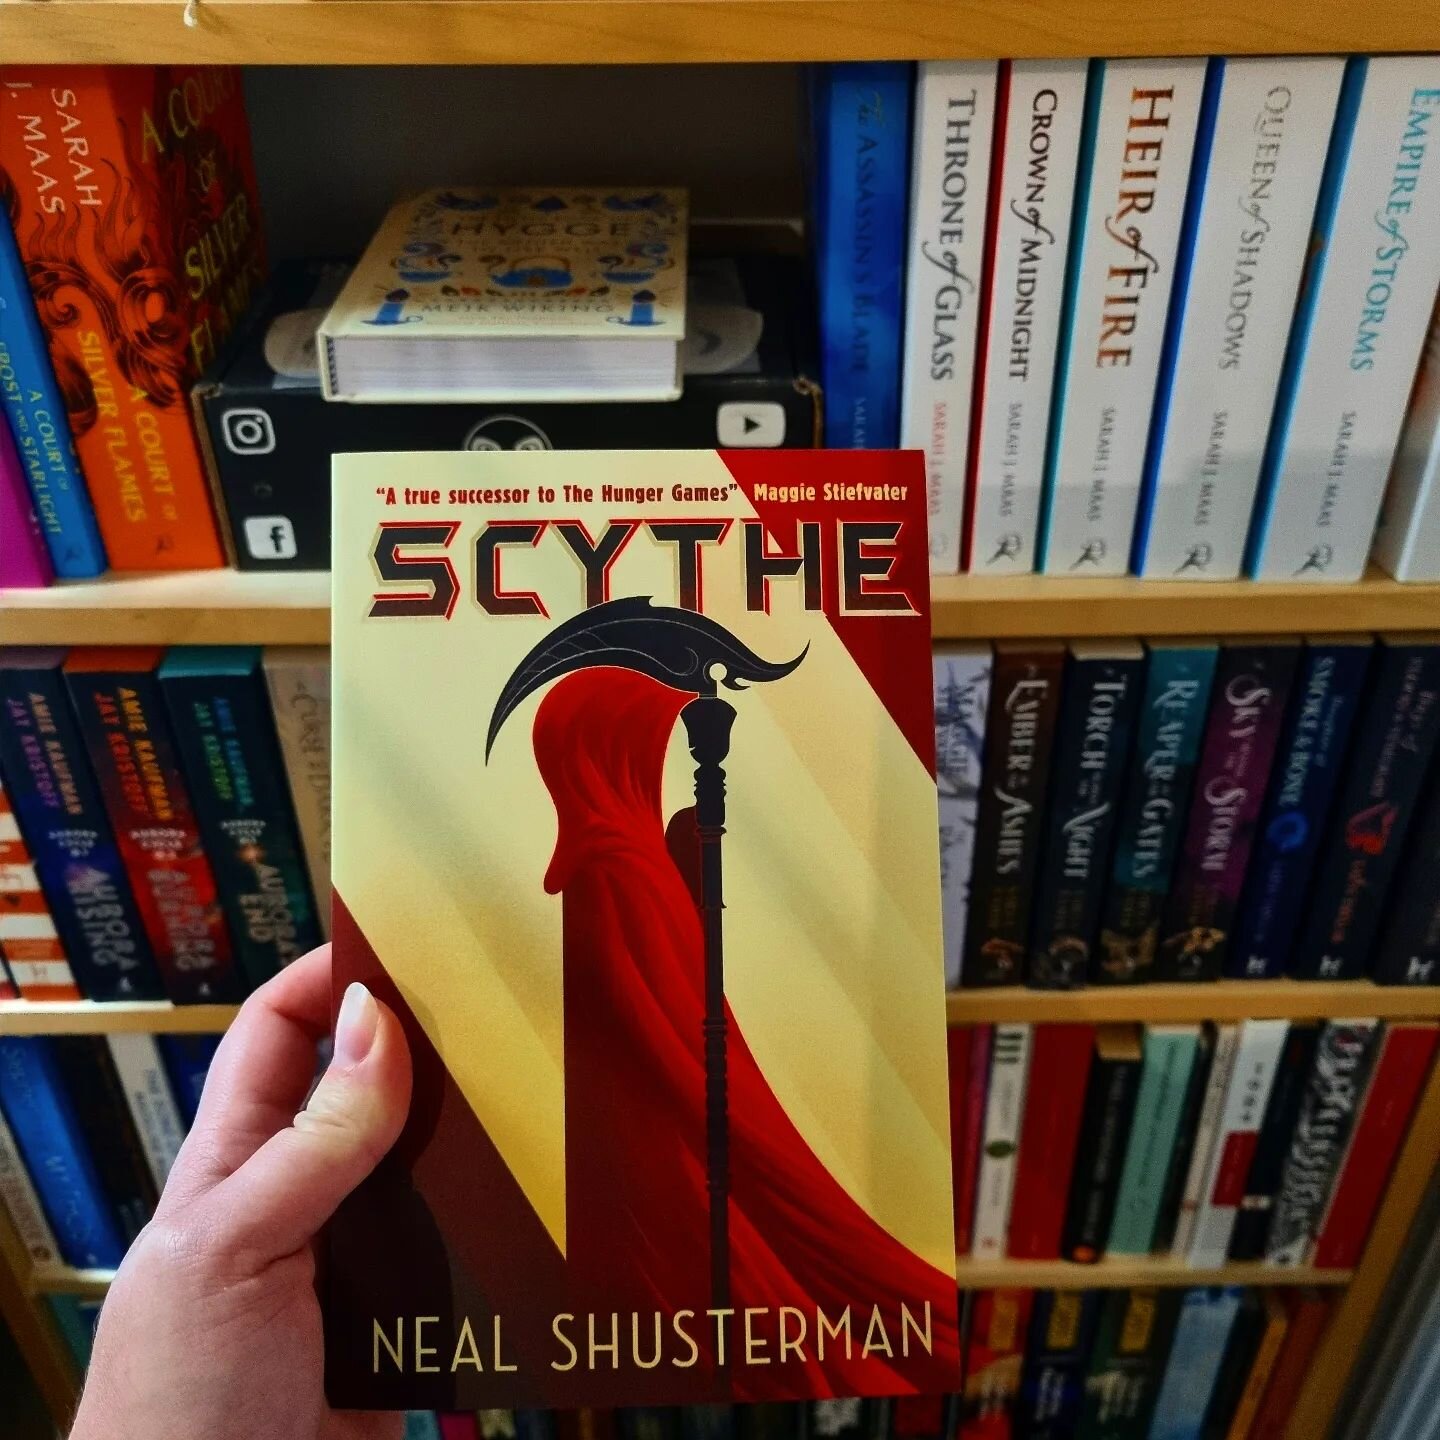 What are you currently reading?

Predictably, I am deep into Crescent City 3 and suffering from whiplash!

#bookstagram #bookstagramireland #booksta #bookstagrammer #booksofinstagram #booksofig #booklover #currentlyreading #currentread #scythe #neals